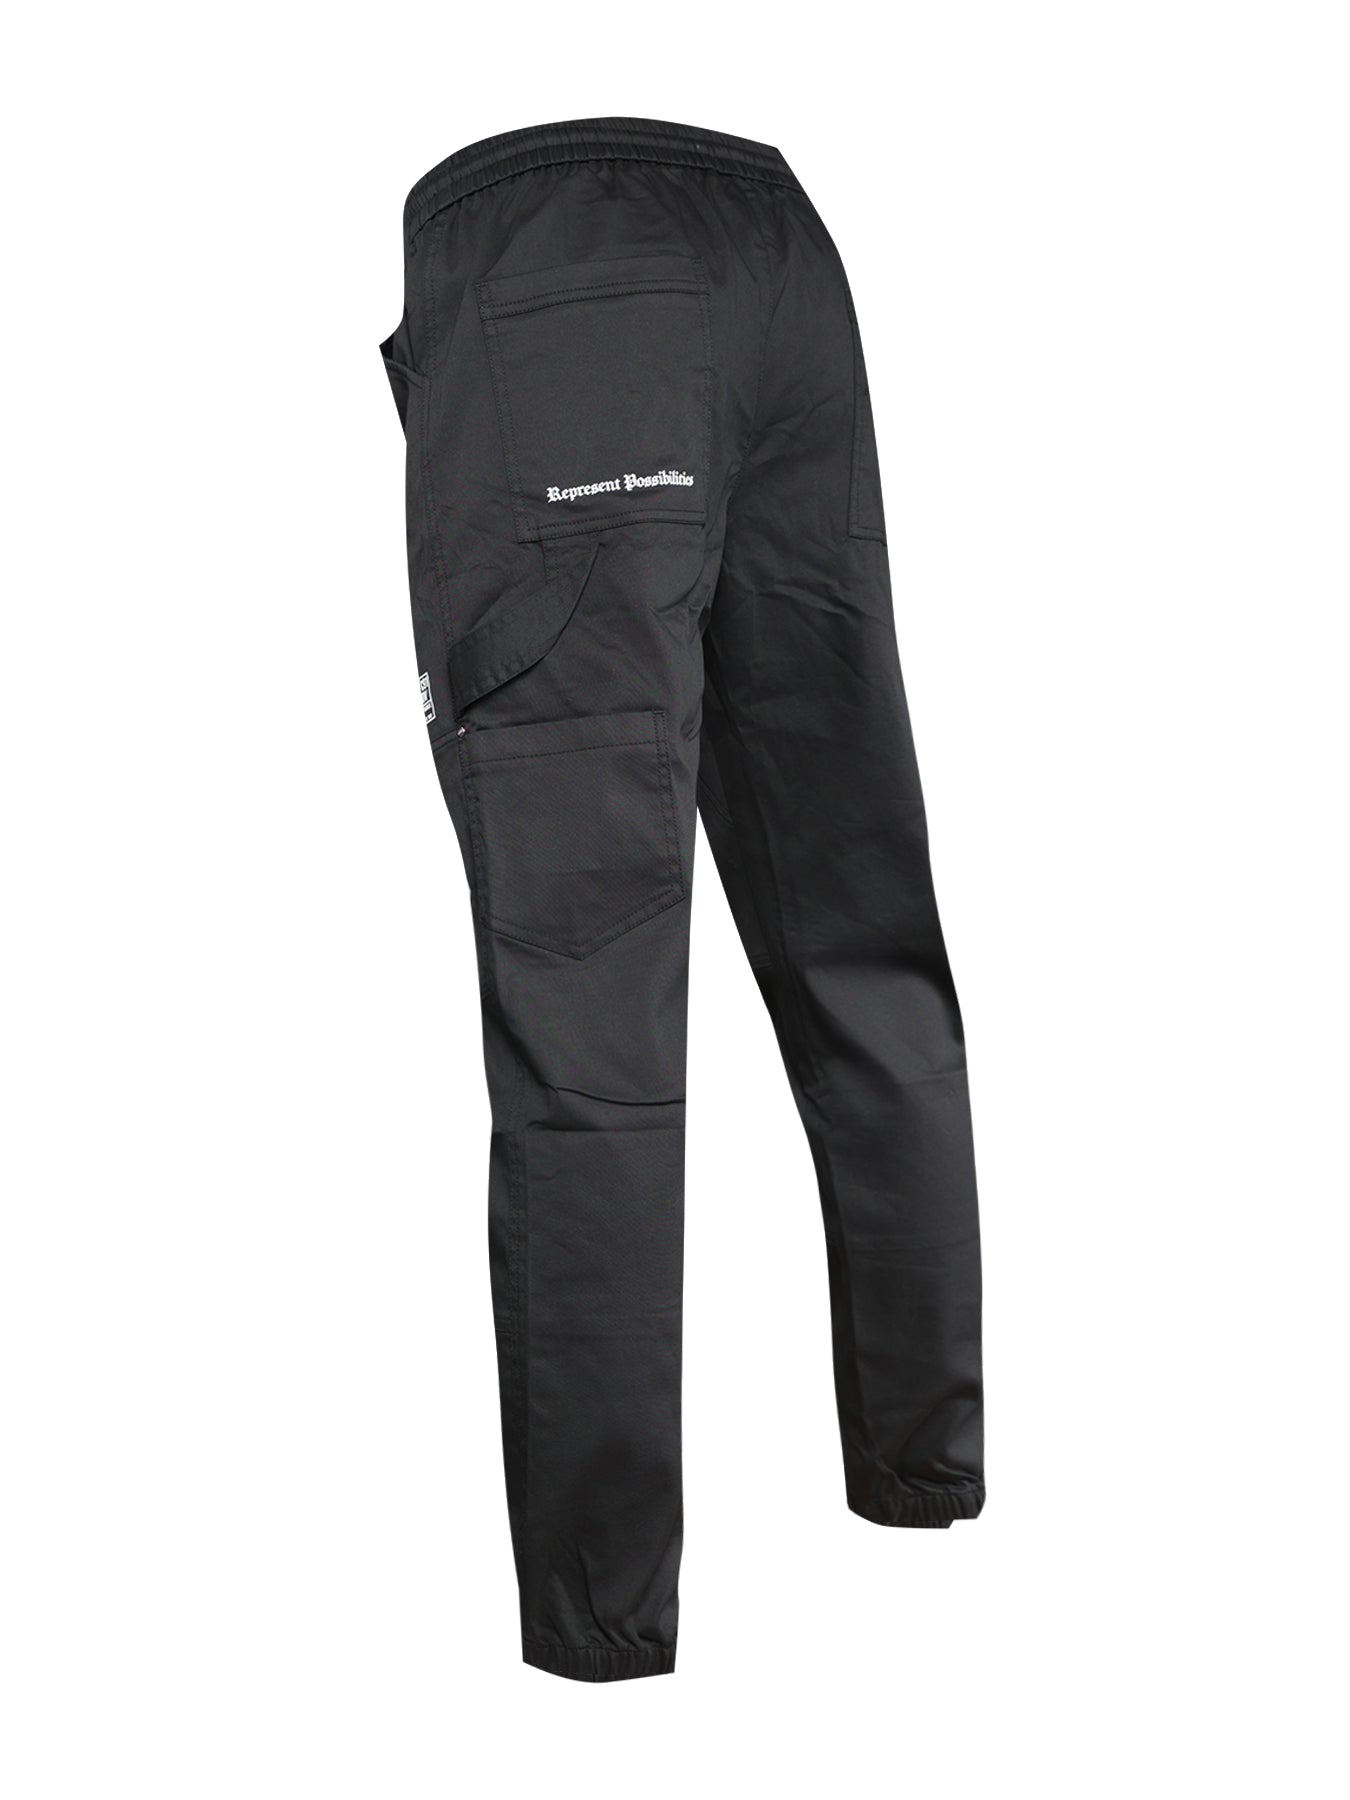 "Possibilities" Joggers with Multi Pockets - XIOS America